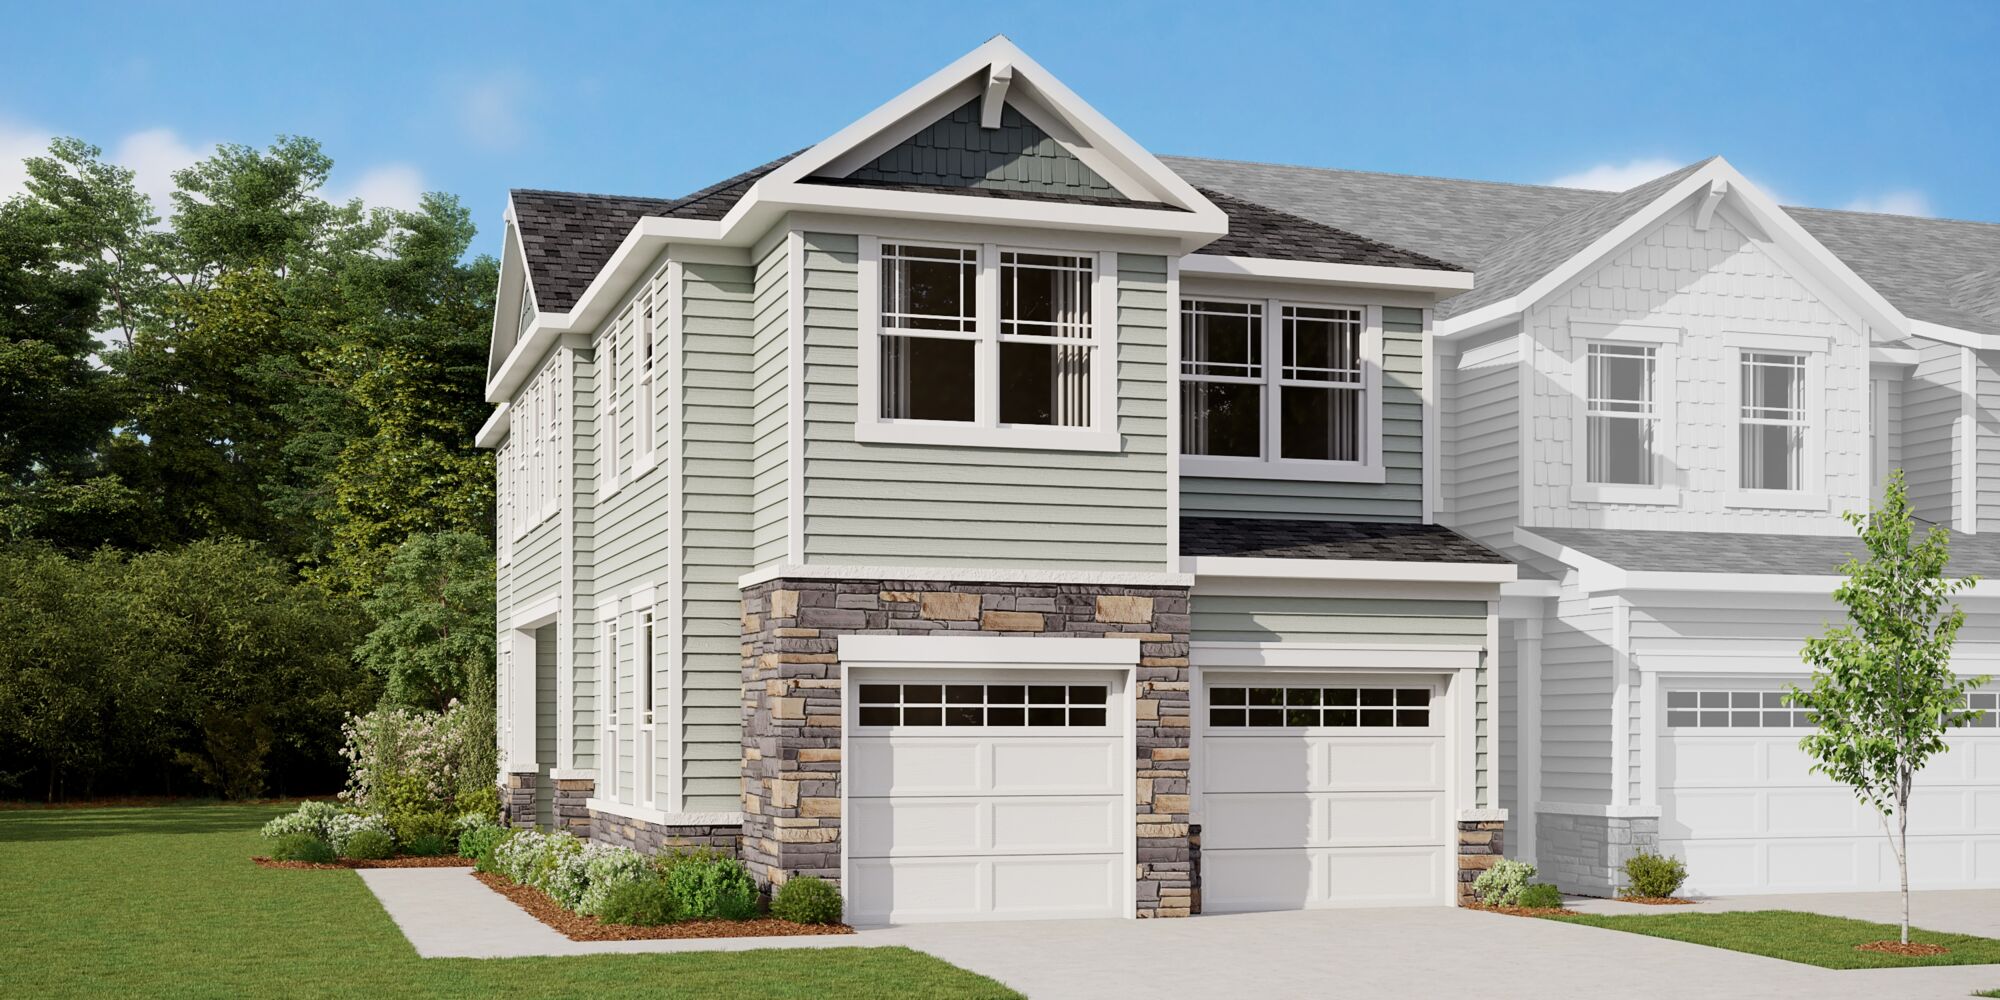  Town Homes with garage, window, exterior stone and exterior clapboard